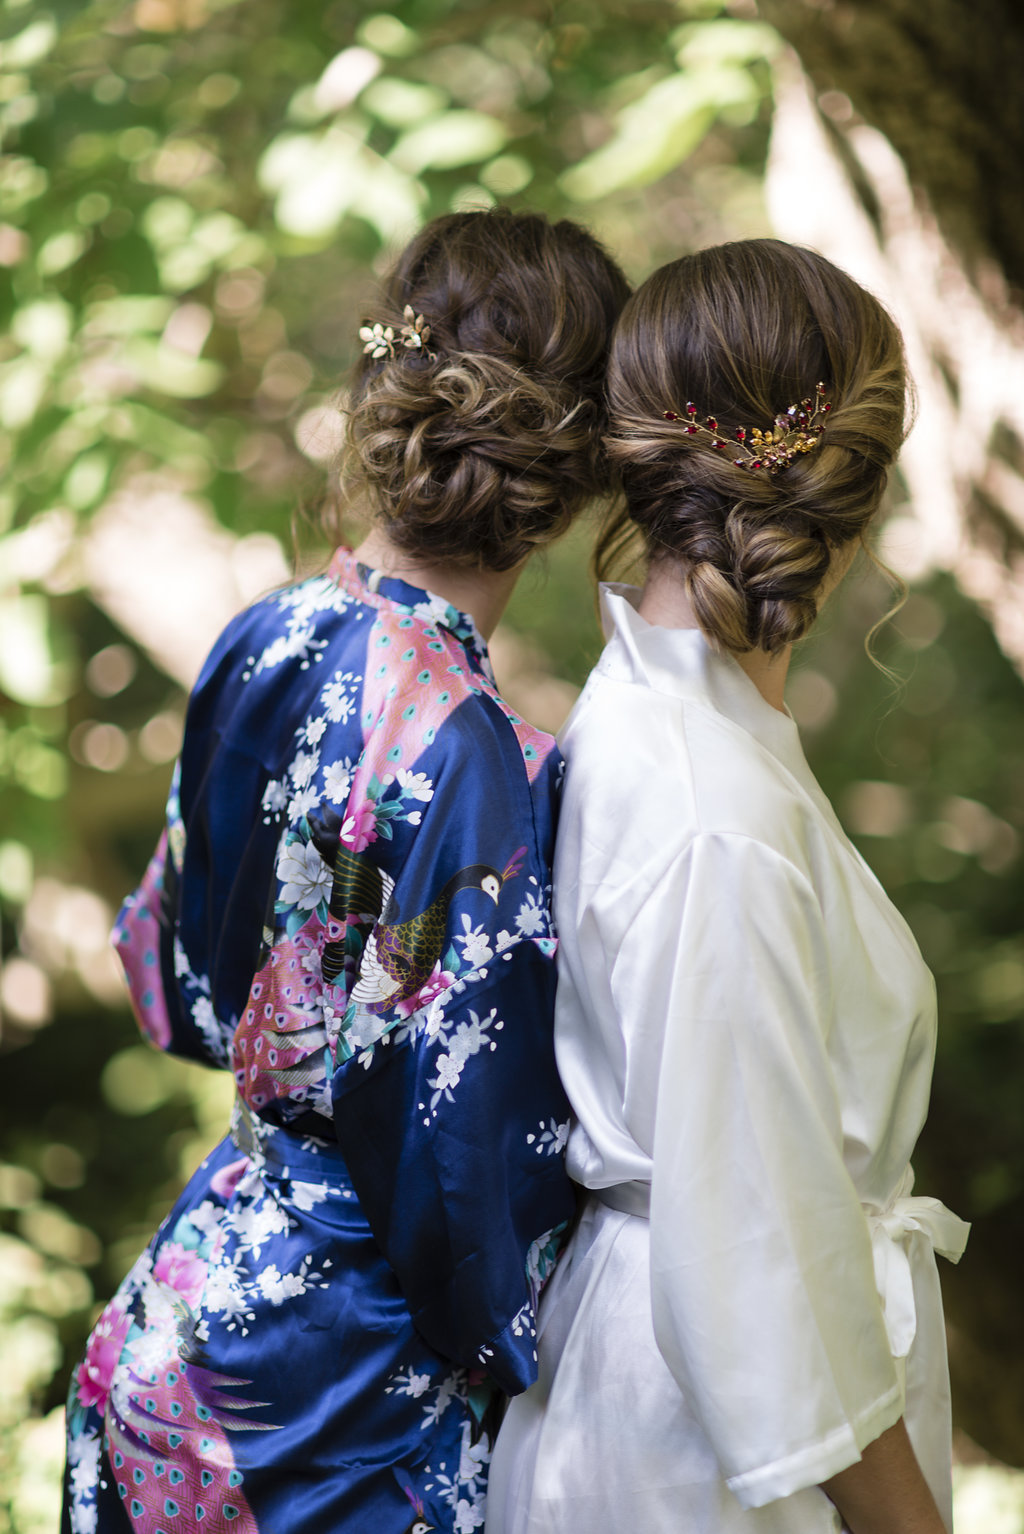 Two Girls Showing Their Beautiful Hair Styles | The Wedding Standard